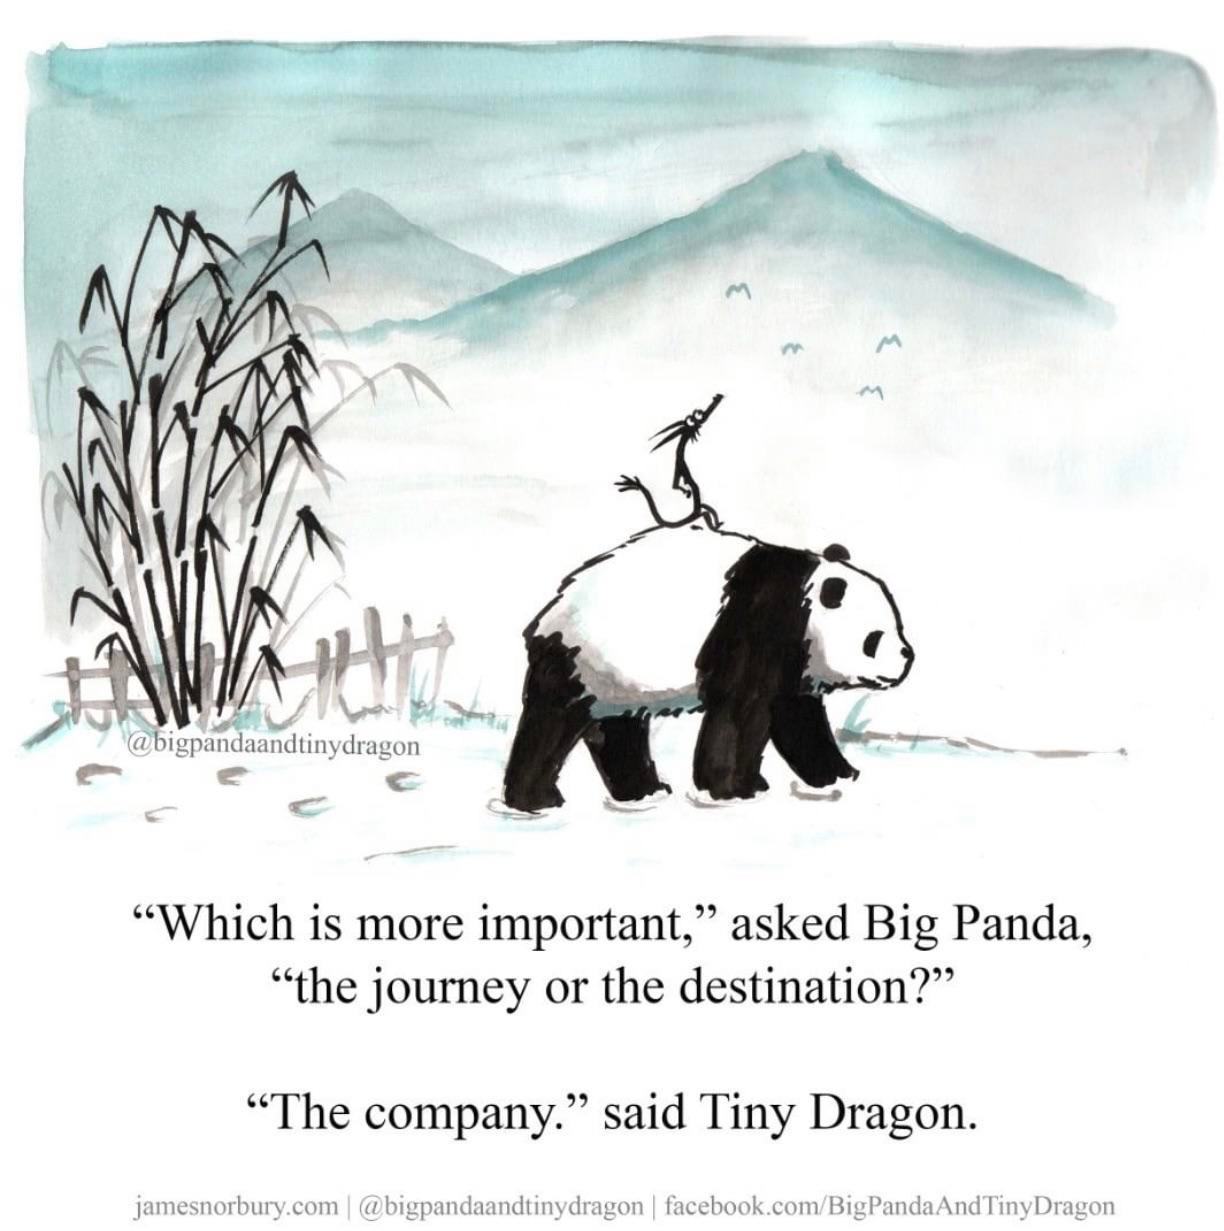 r/wholesomememes - "Which is more important," asked Big Panda, “the journey or the destination?" "The company." said Tiny Dragon. |@bigpandaandtinydragon | facebook.com/BigPandaAndTinyDragon